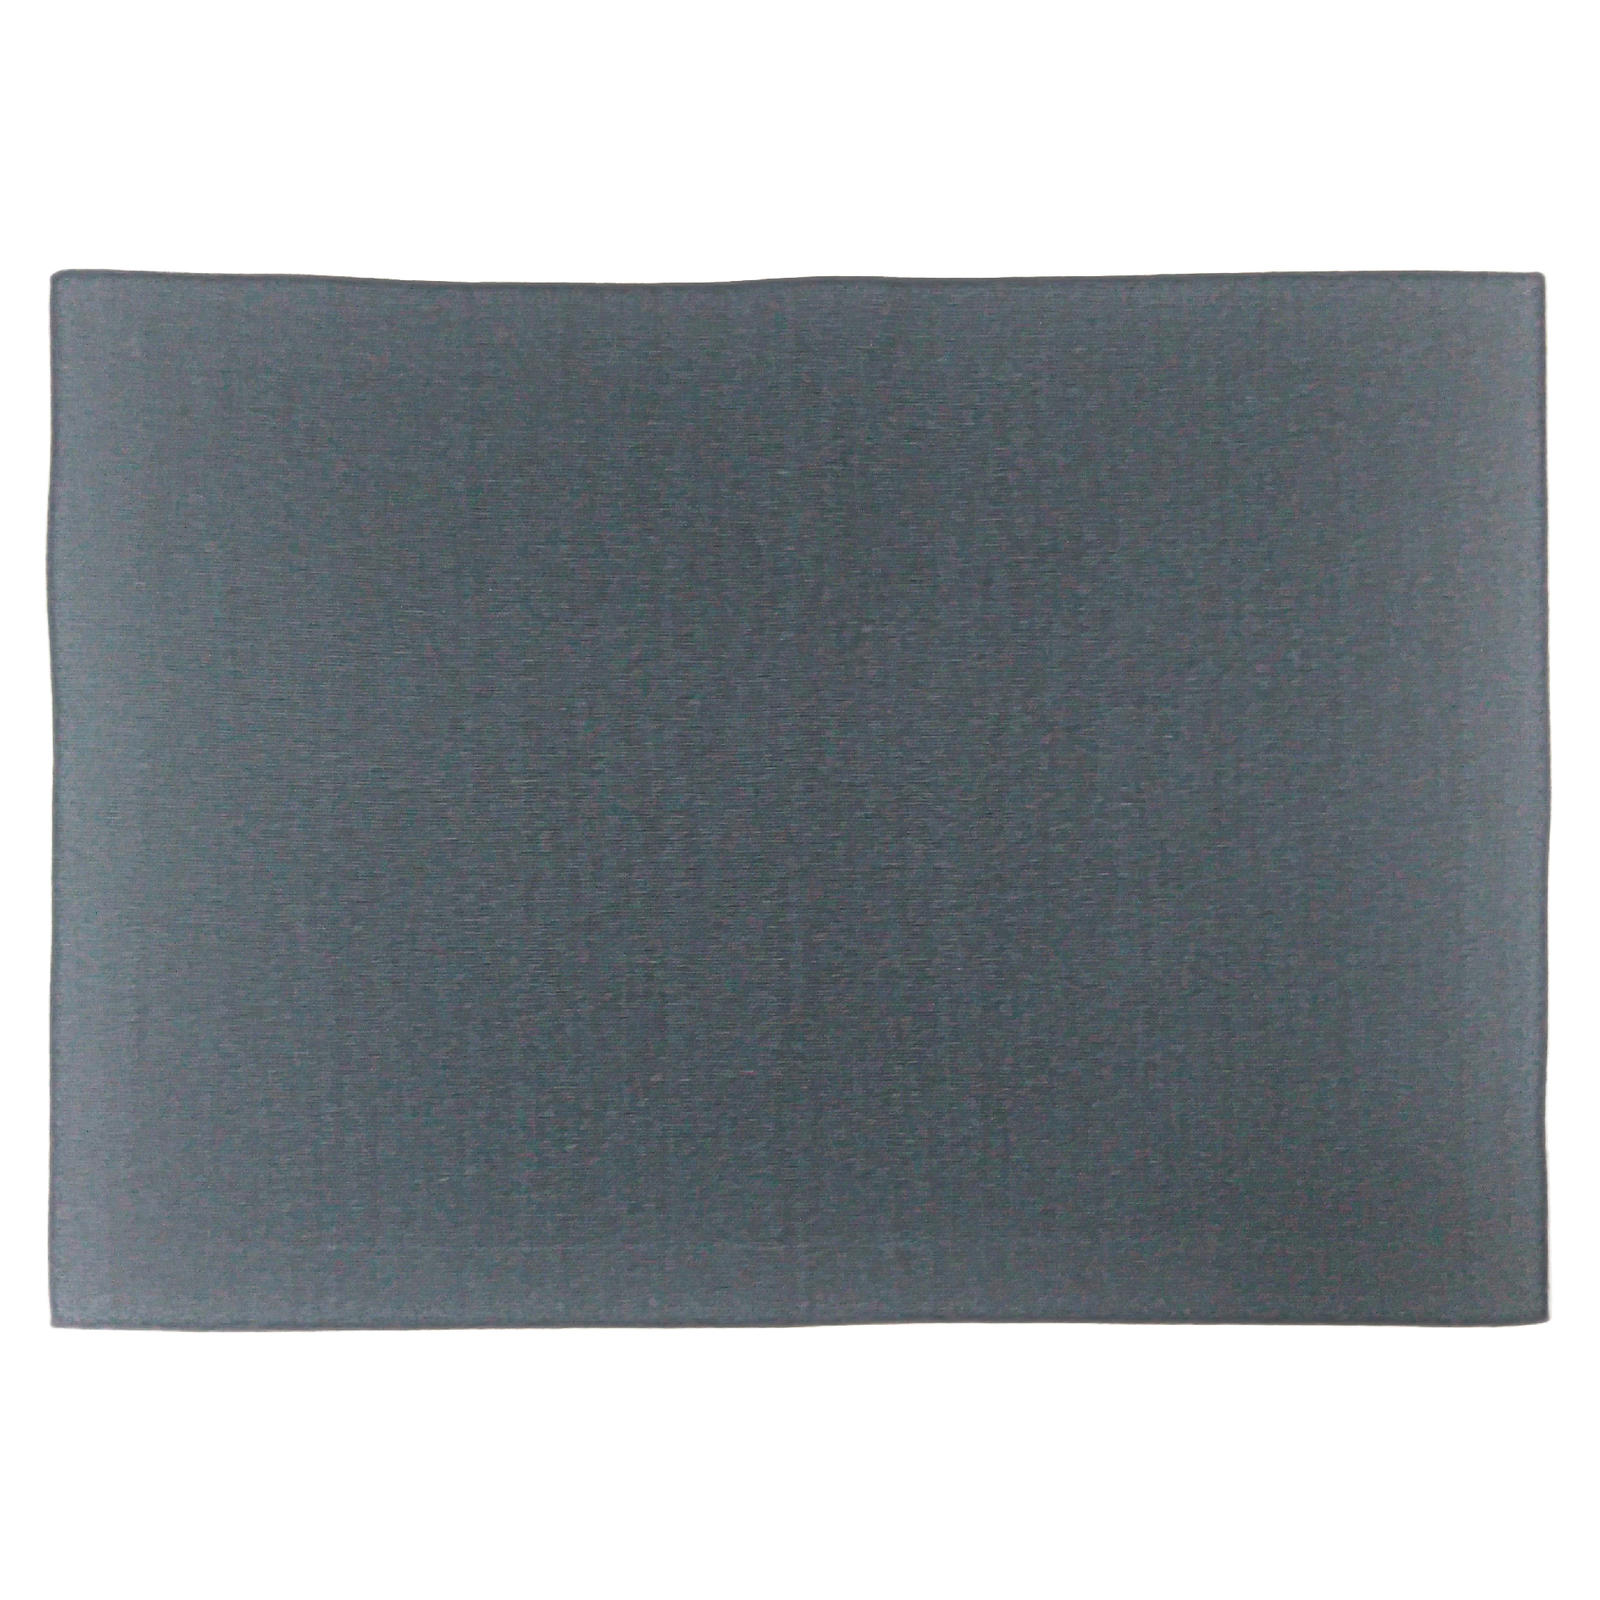 Cannon Placemat - Navy